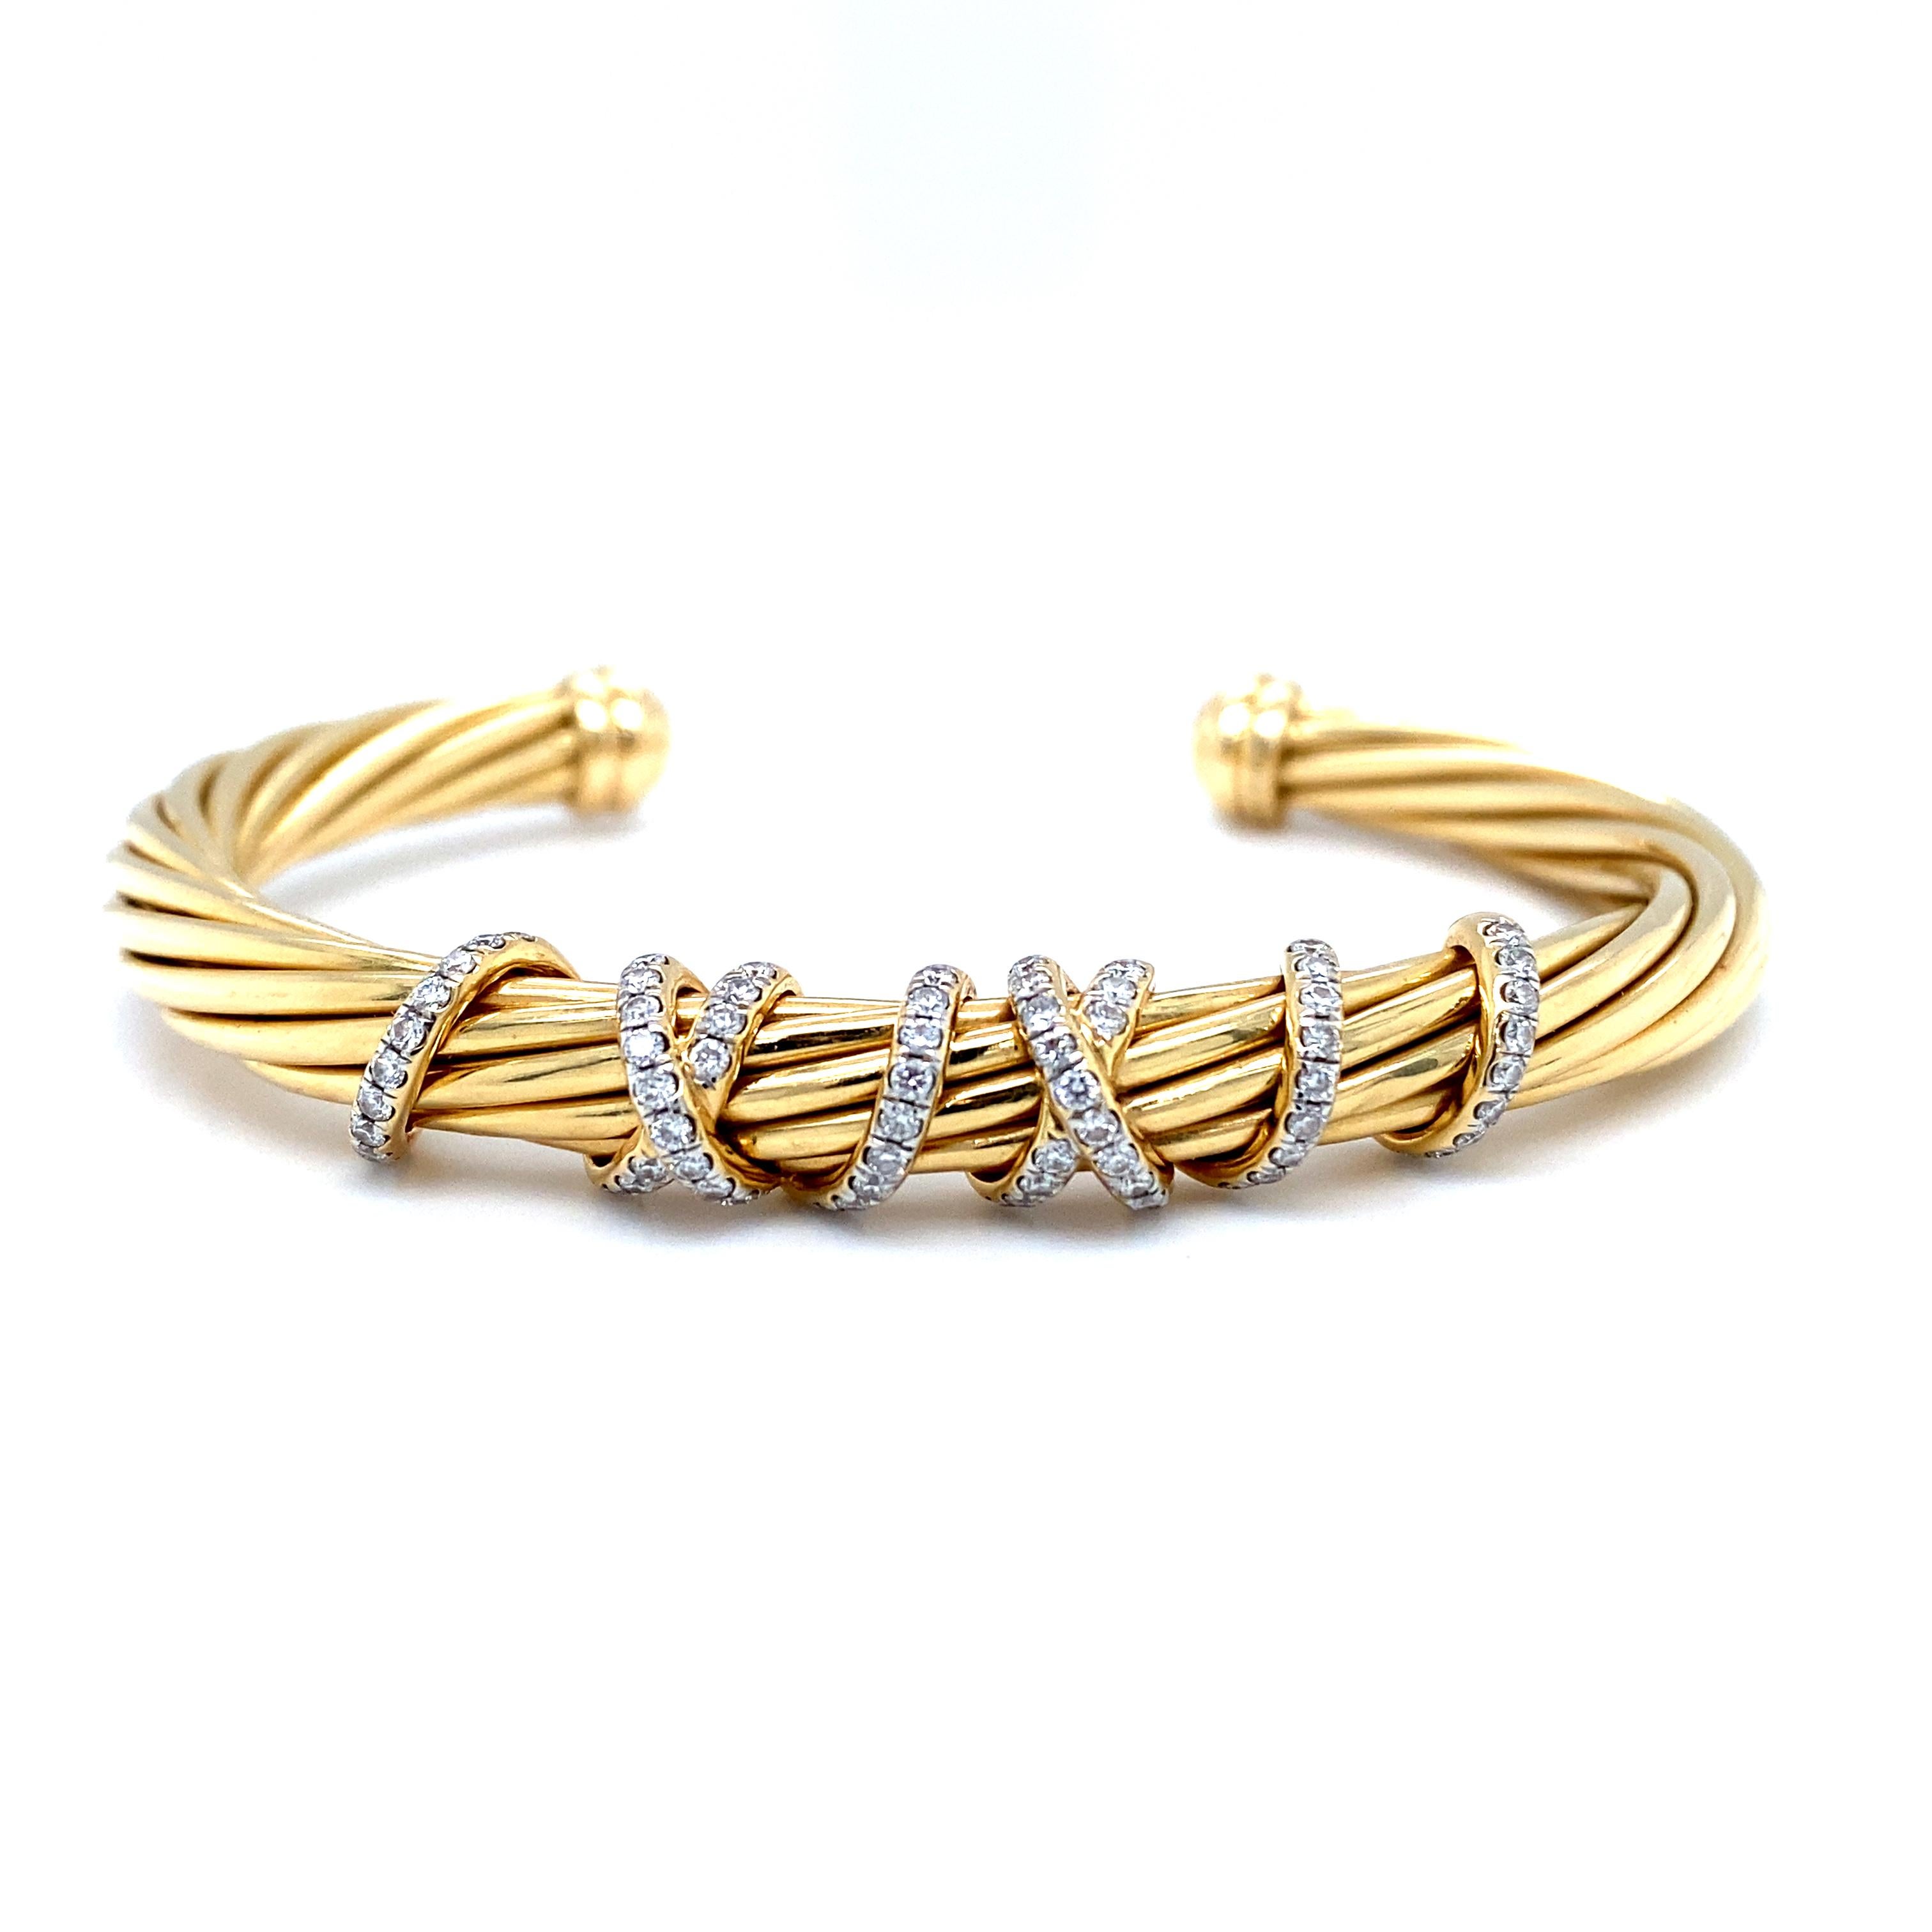 Item Details: This stunning cuff bracelet by David Yurman features a twisted gold design with a wrapping crossover in the center studded with round diamonds. It is impeccably crafted in 18 karat yellow gold and features over half a carat of